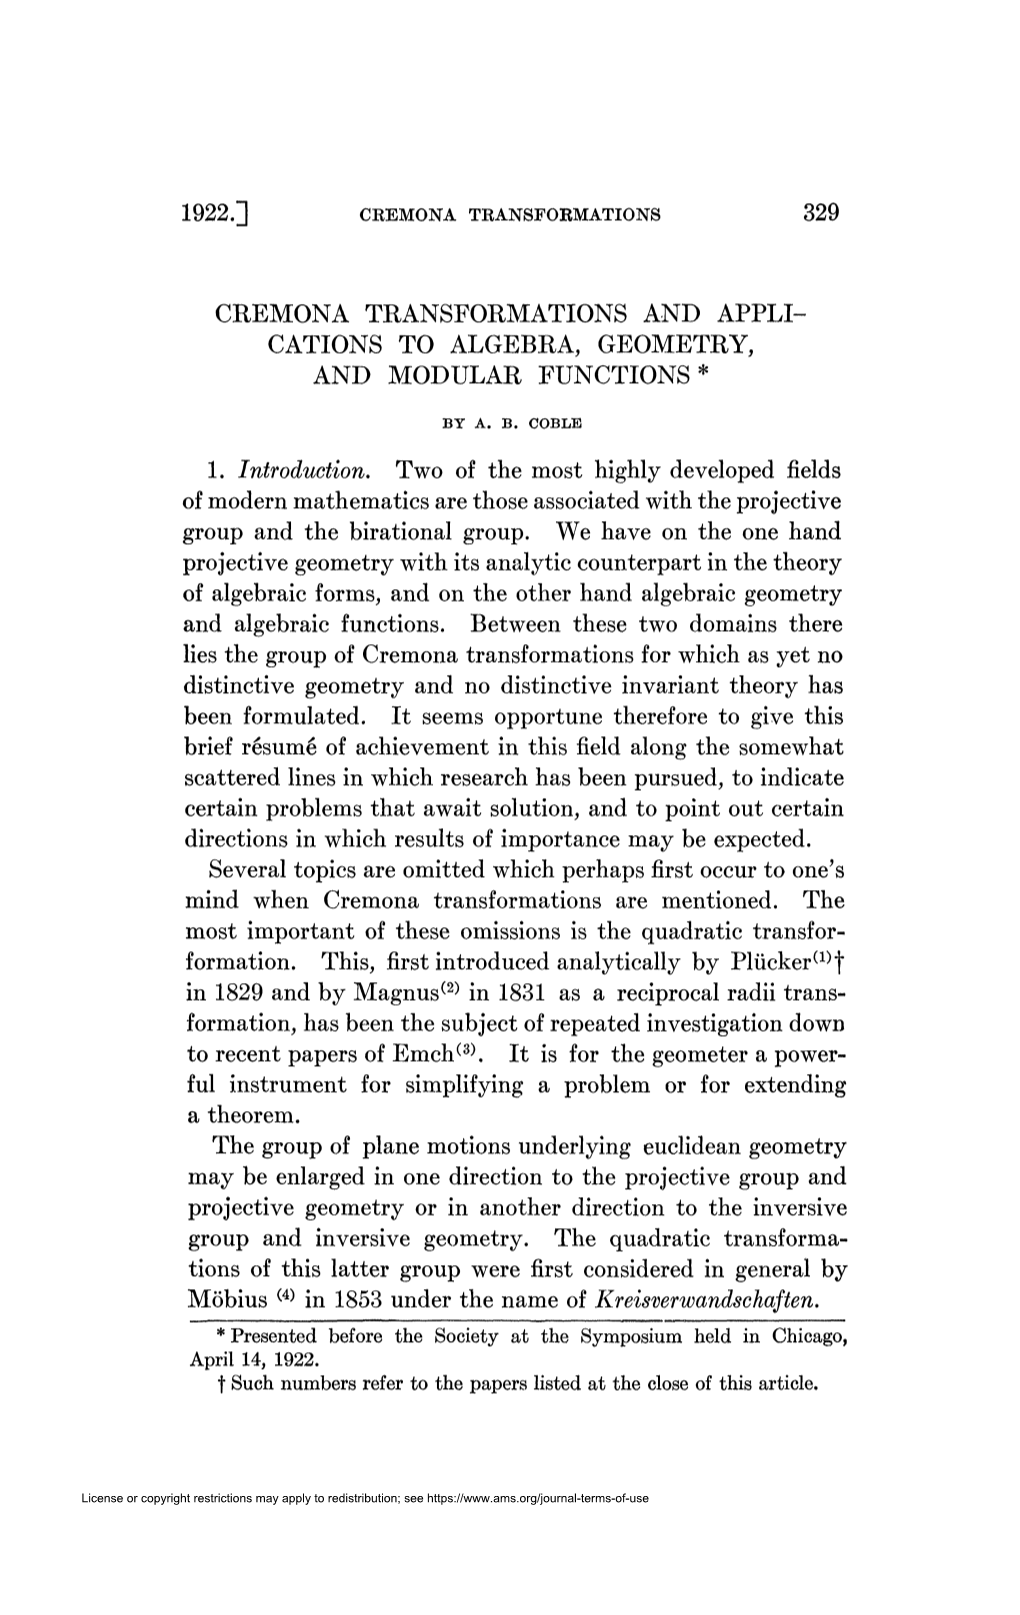 Cremona Transformations and Appli- Cations to Algebra, Geometry, And